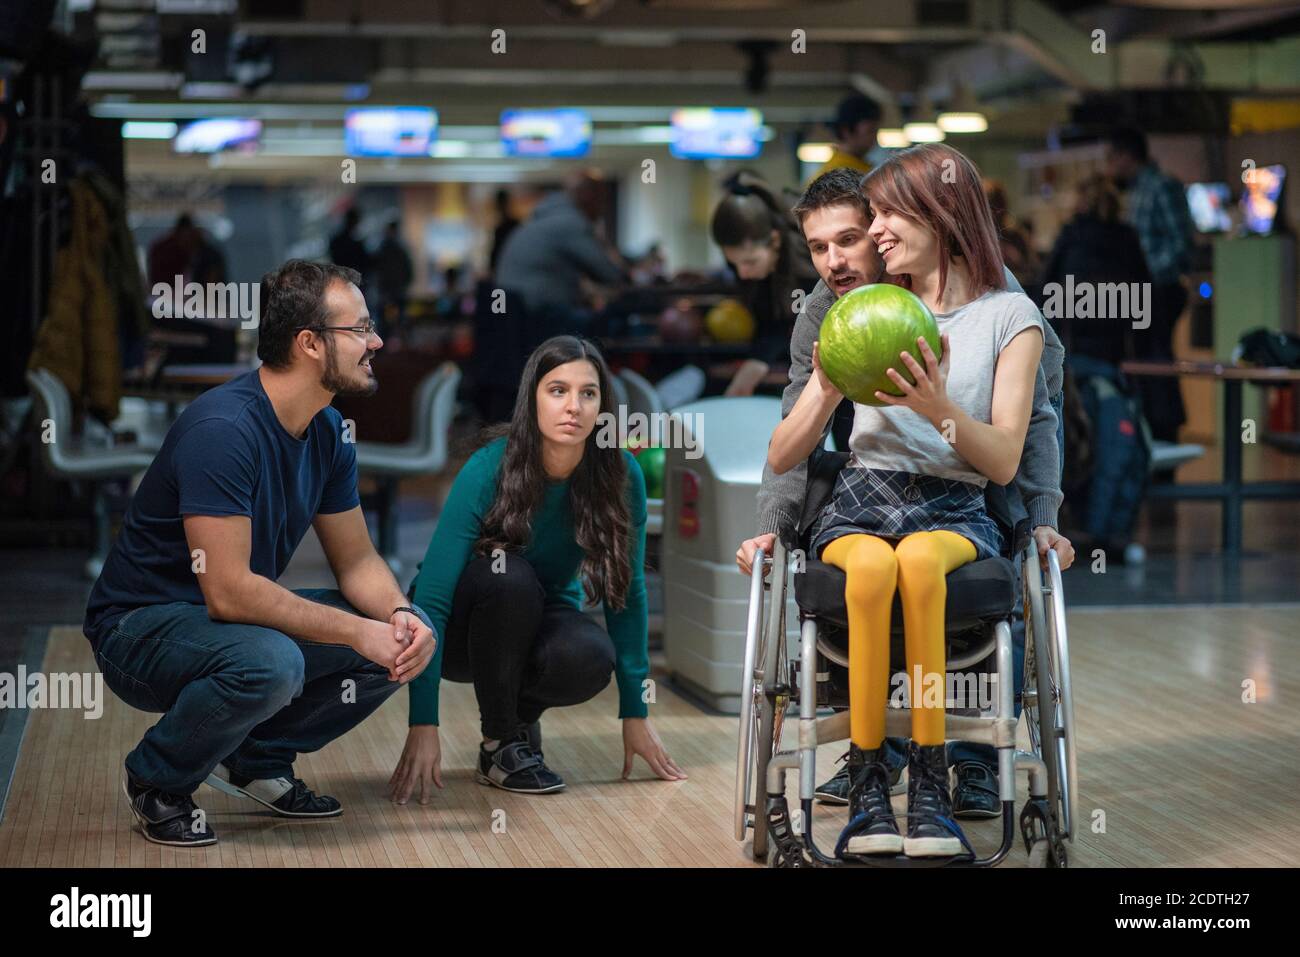 Disabled woman in a wheelchair bowling with friends Stock Photo